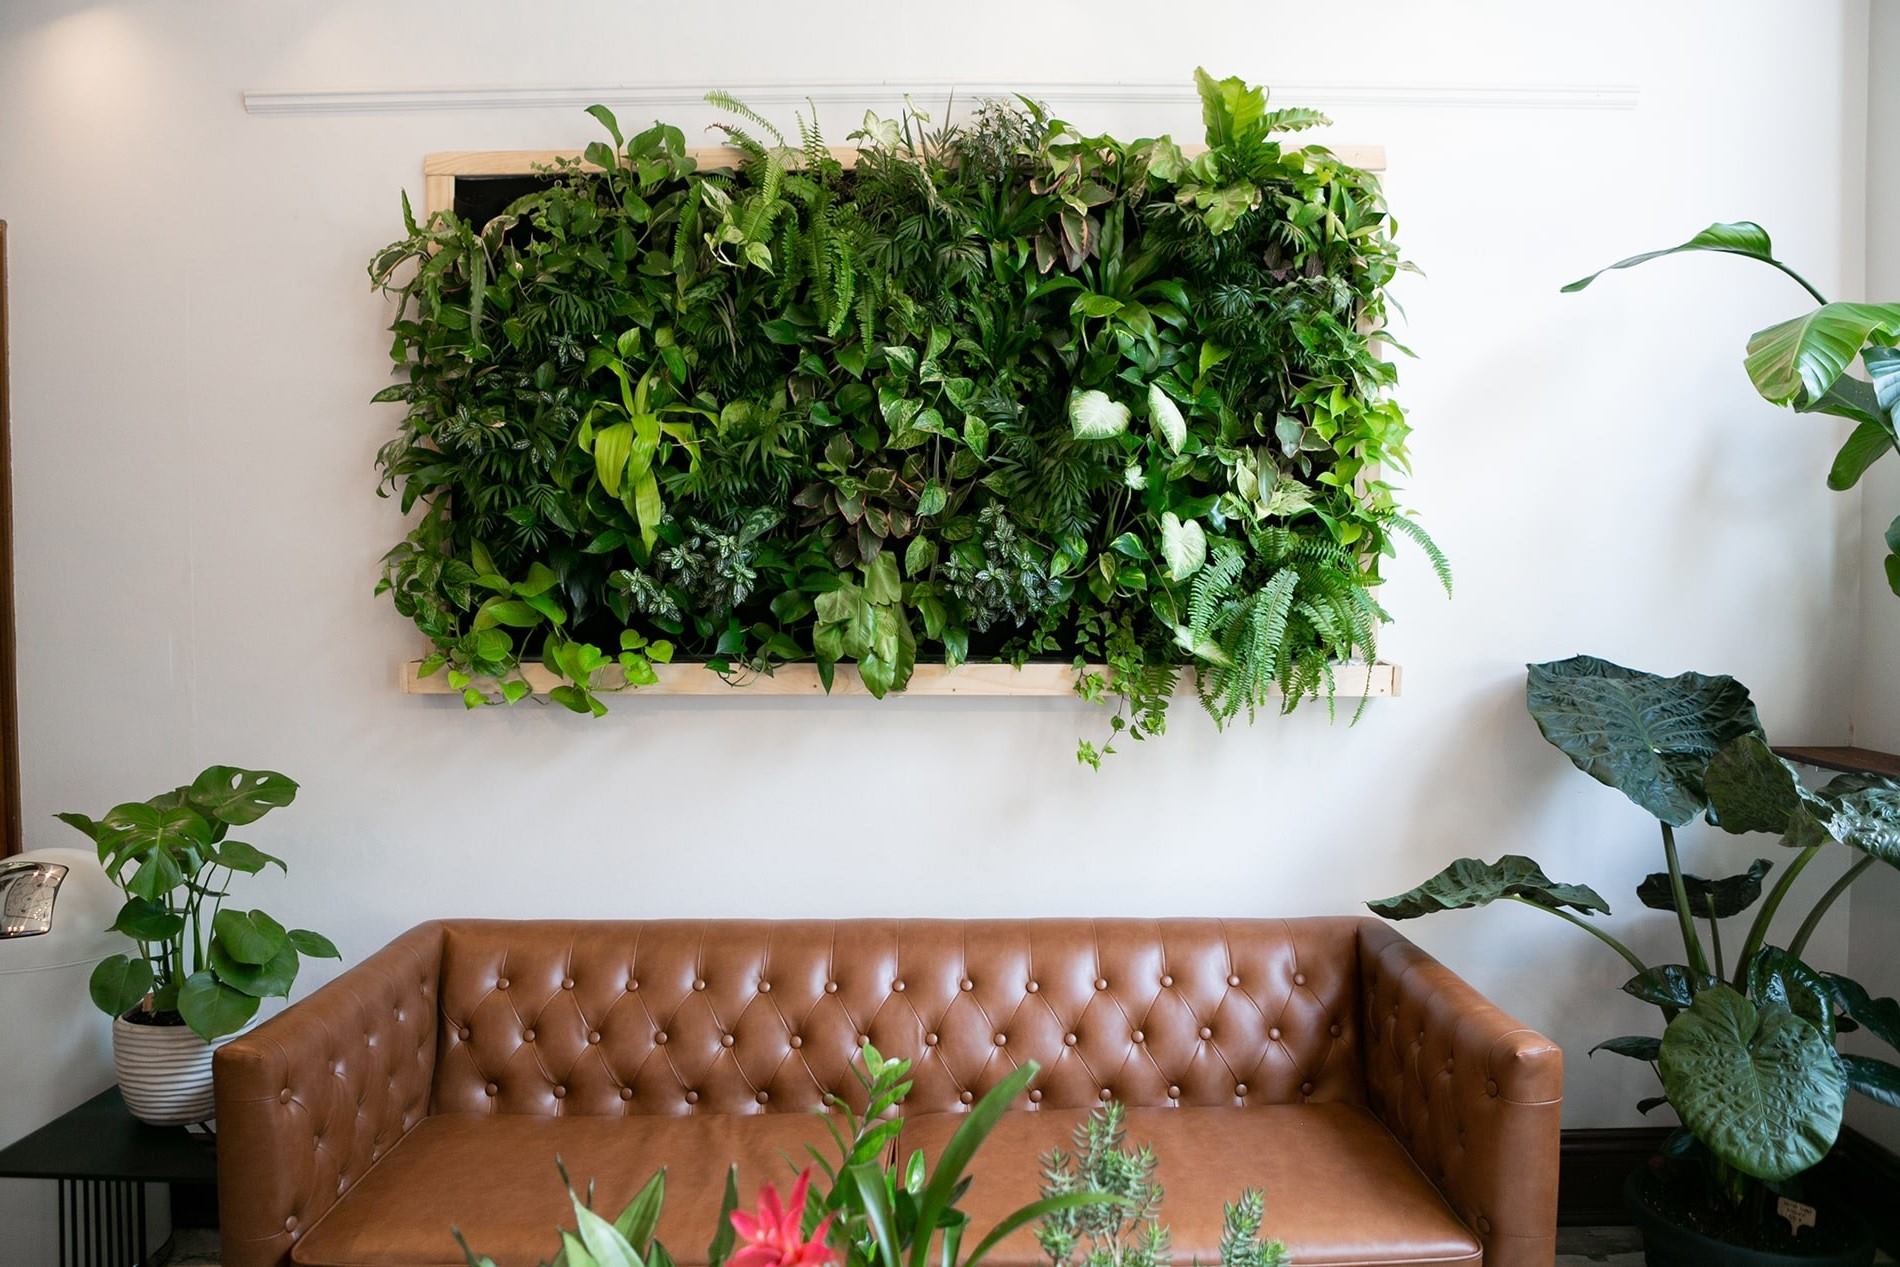 Living Wall DIY: How To Create Your Own Vertical Garden